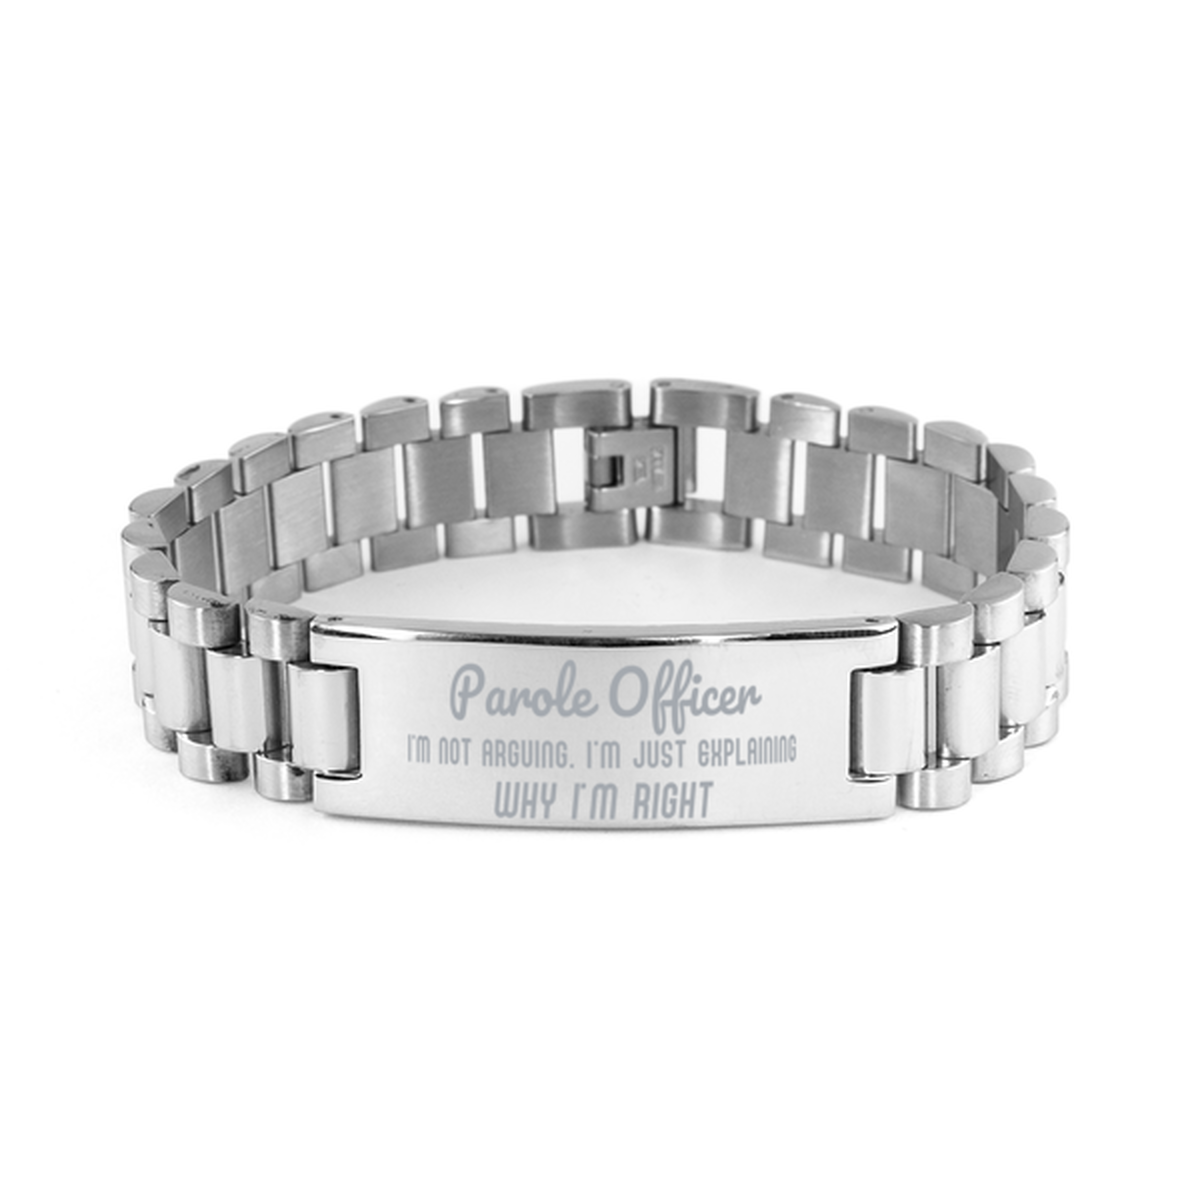 Parole Officer I'm not Arguing. I'm Just Explaining Why I'm RIGHT Ladder Stainless Steel Bracelet, Graduation Birthday Christmas Parole Officer Gifts For Parole Officer Funny Saying Quote Present for Men Women Coworker